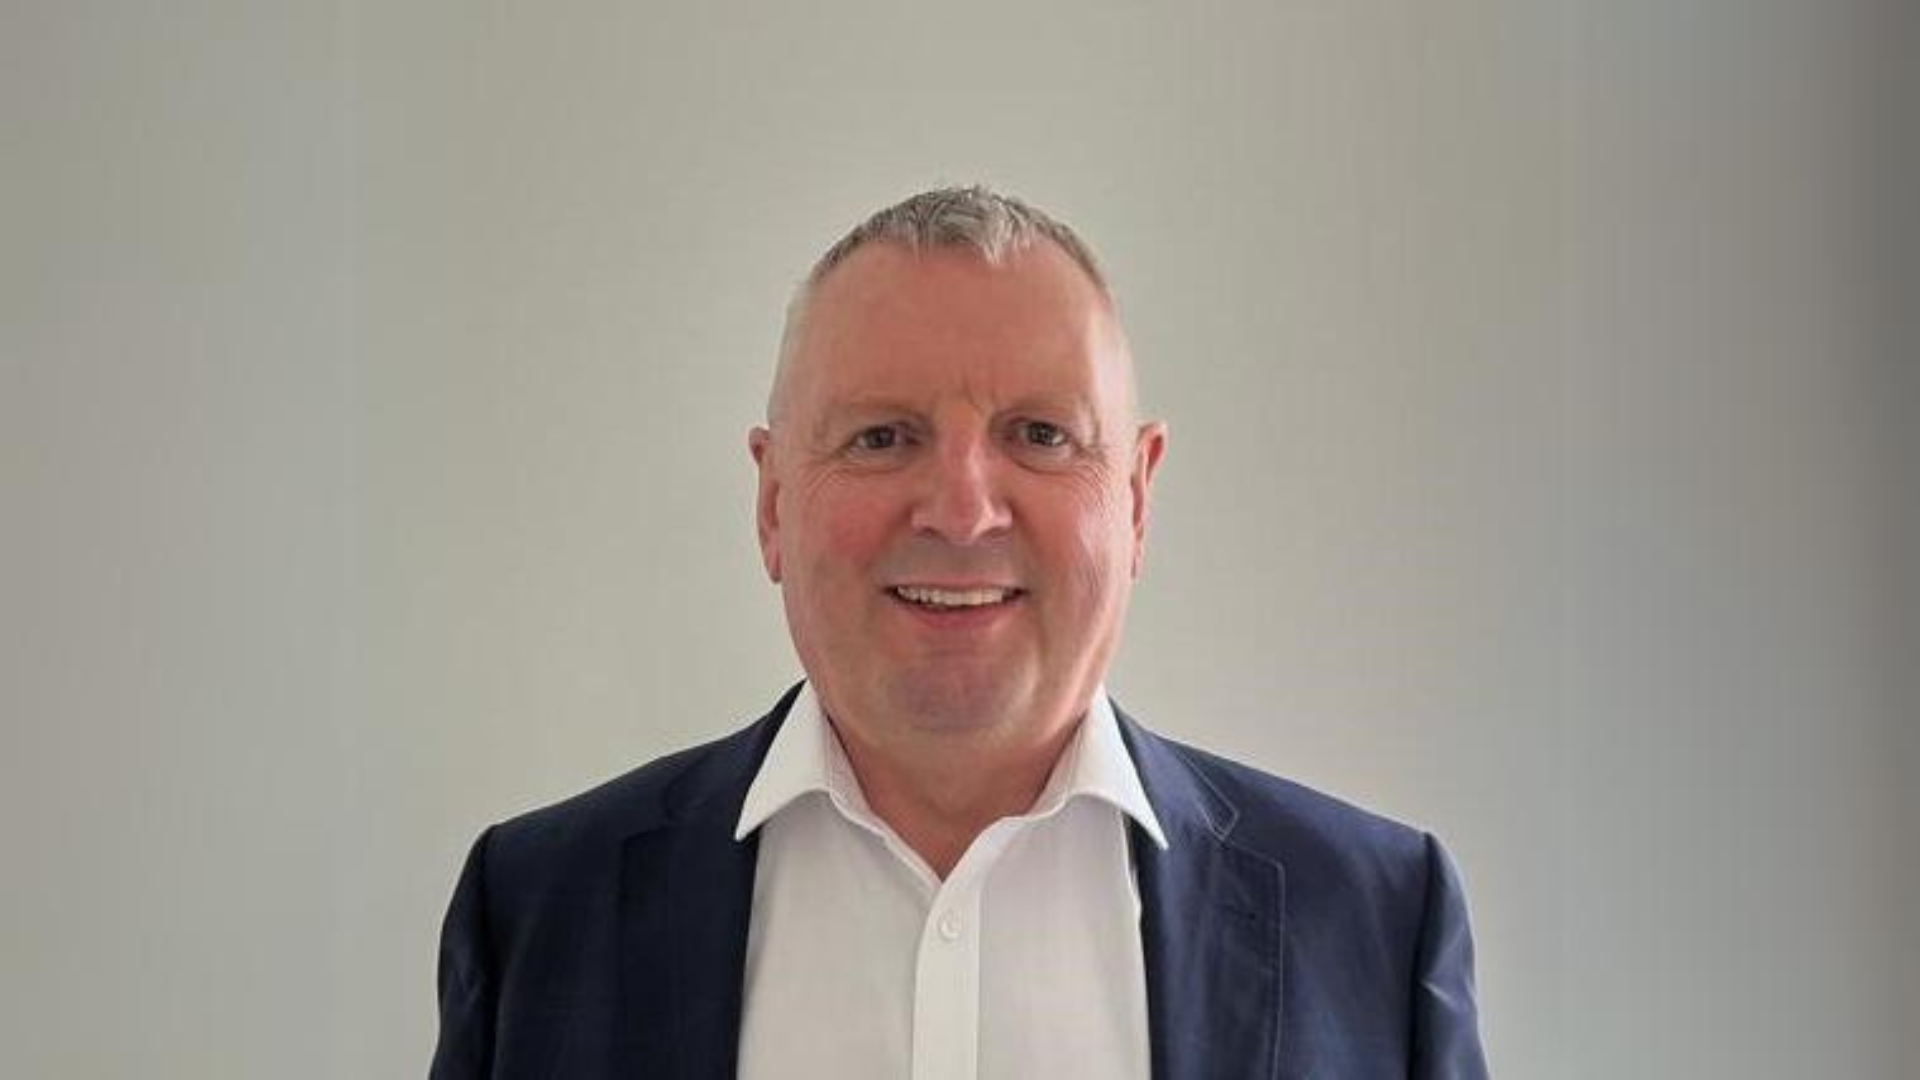 Portfolio appoints Robert Trewick as new Operations Director